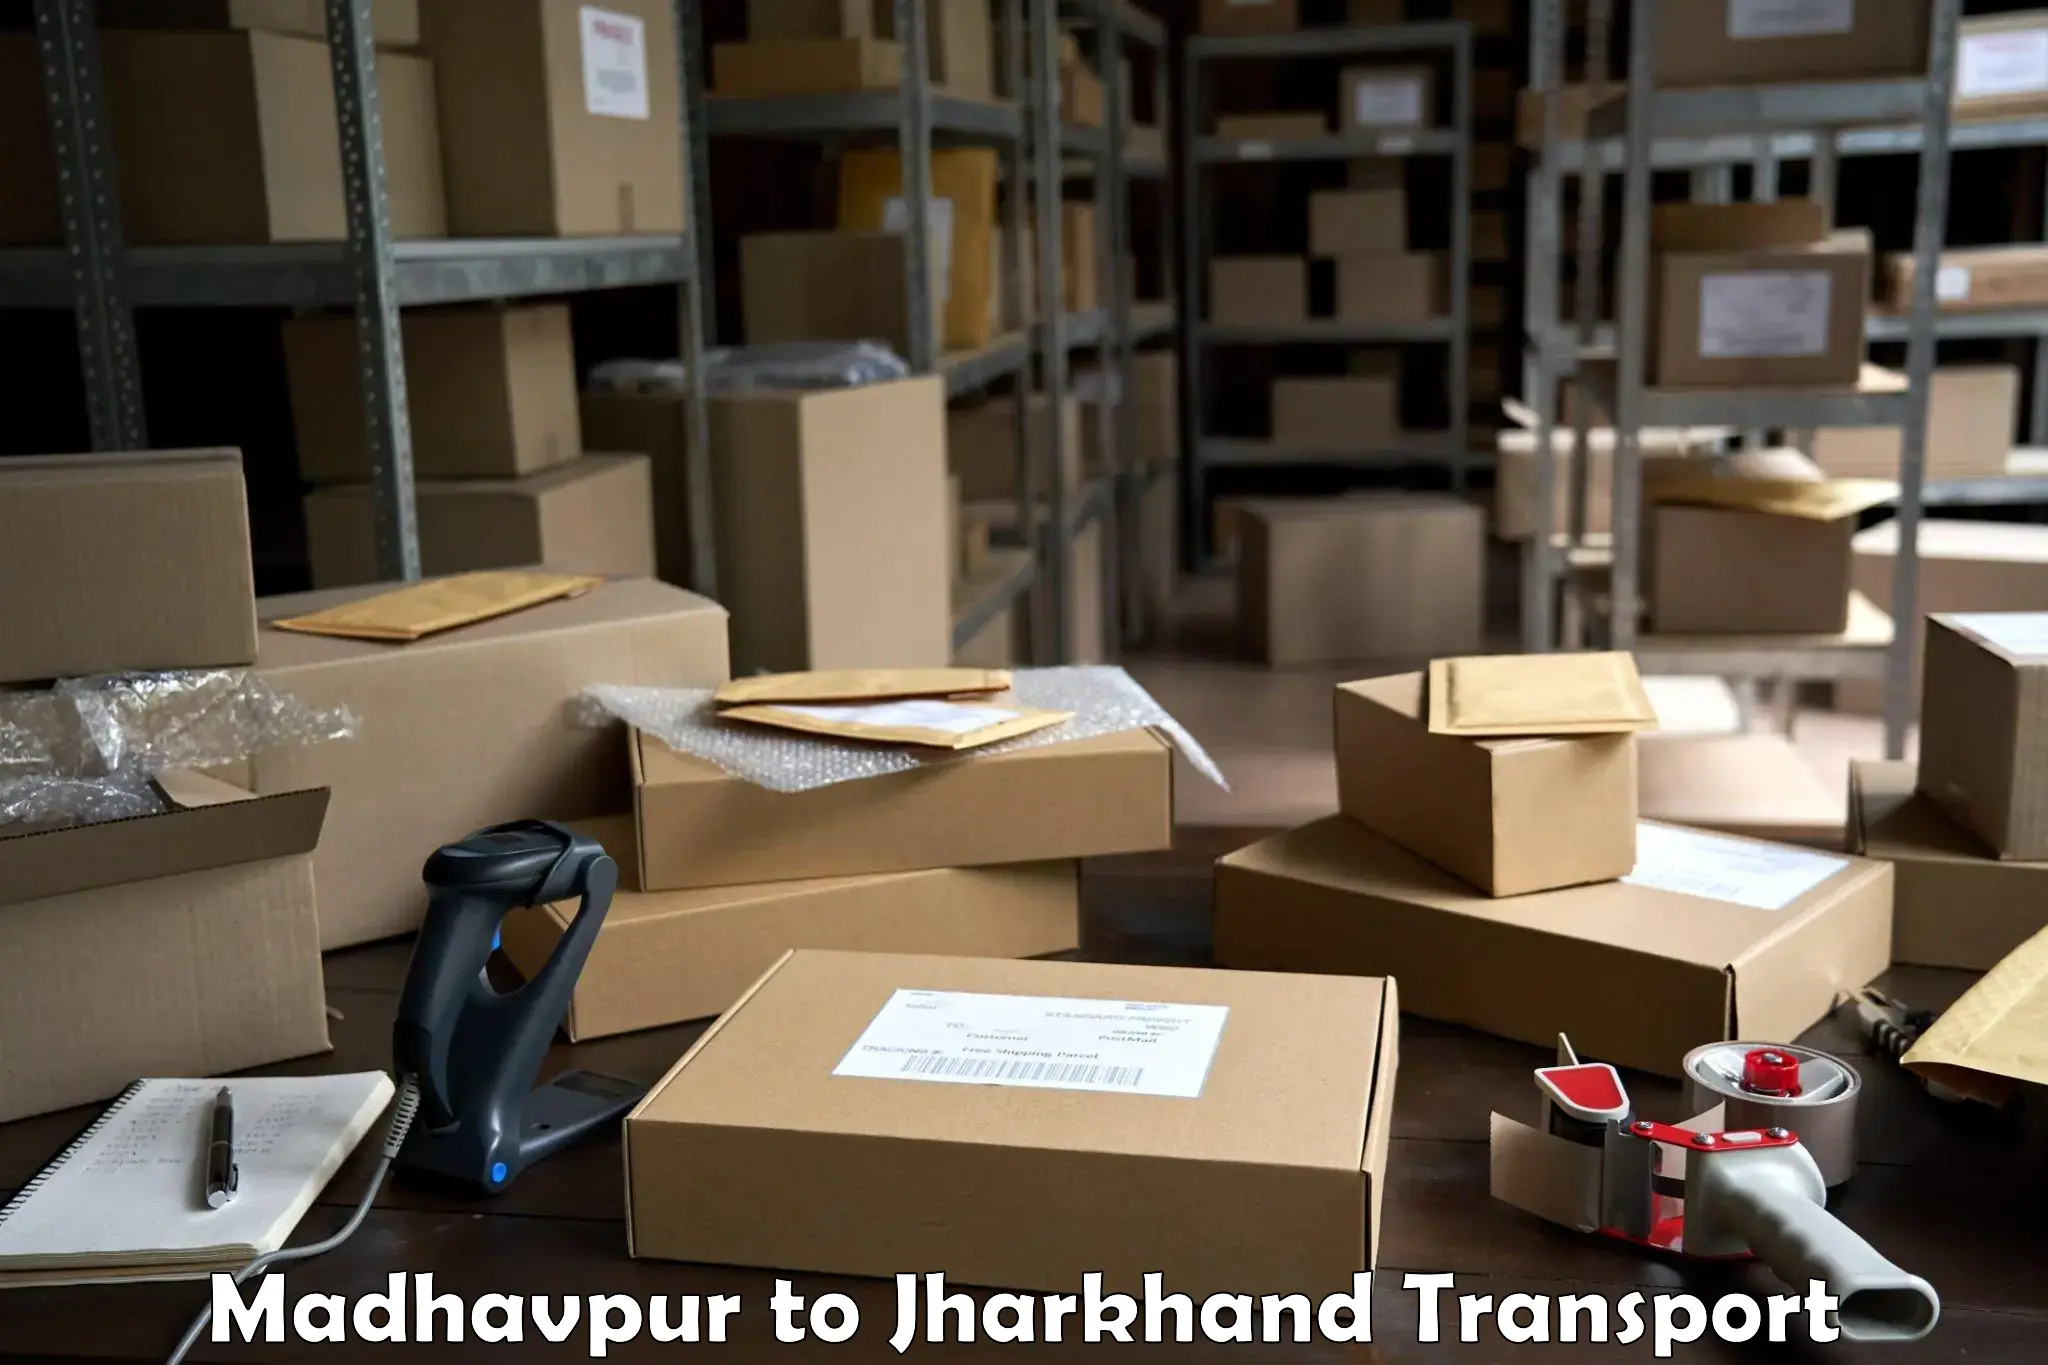 Container transport service Madhavpur to Giridih